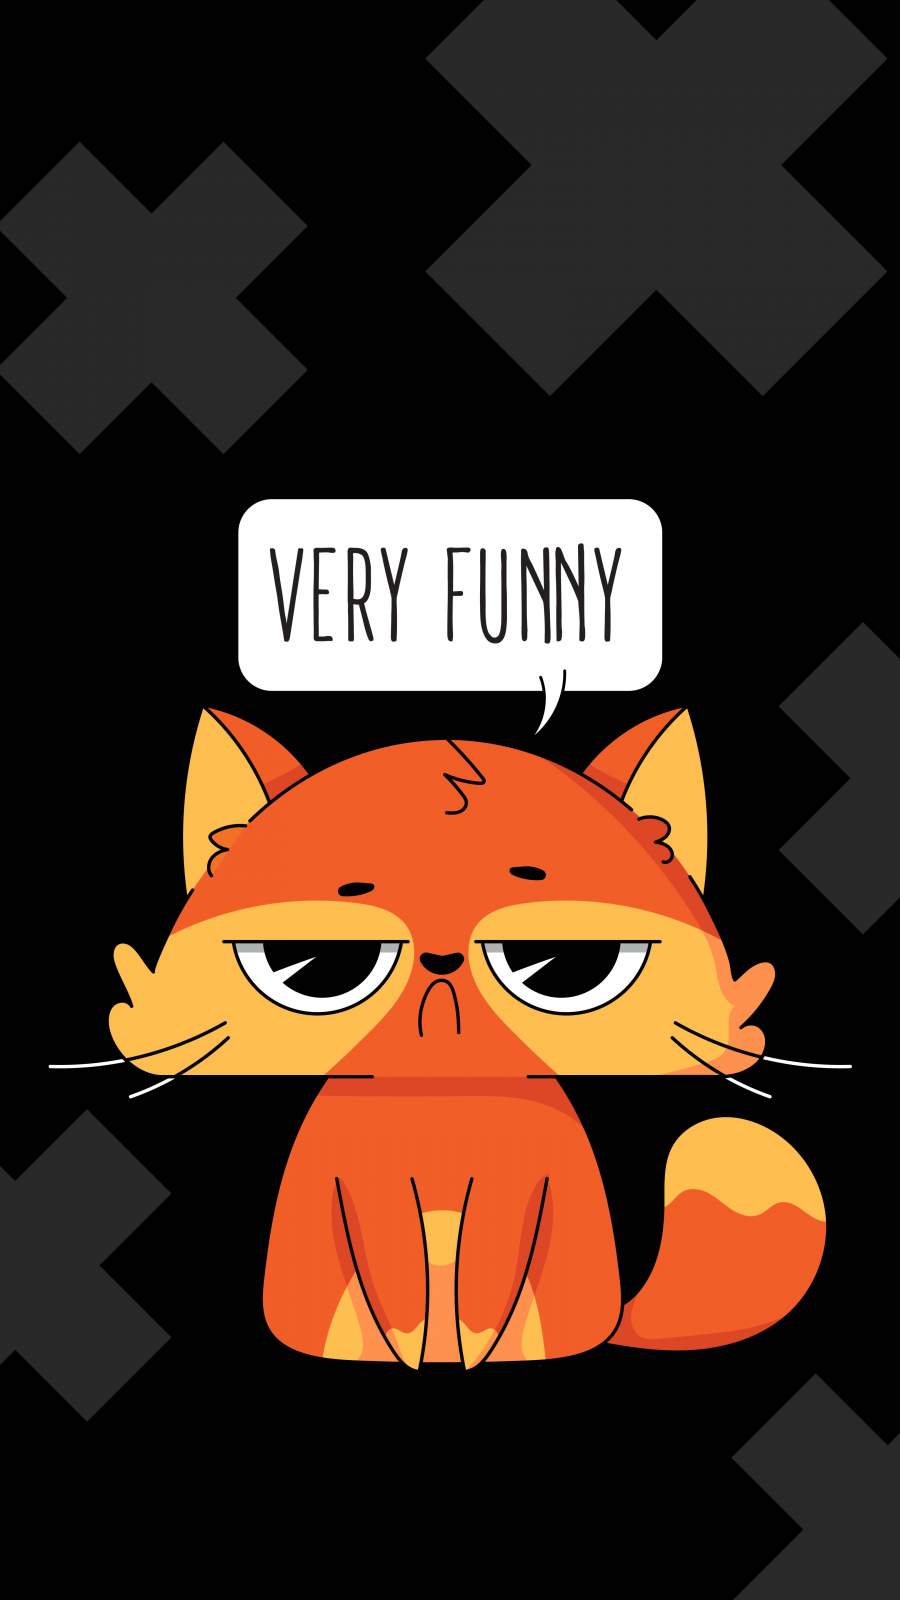 Very Funny IPhone Wallpaper - IPhone Wallpapers : iPhone Wallpapers